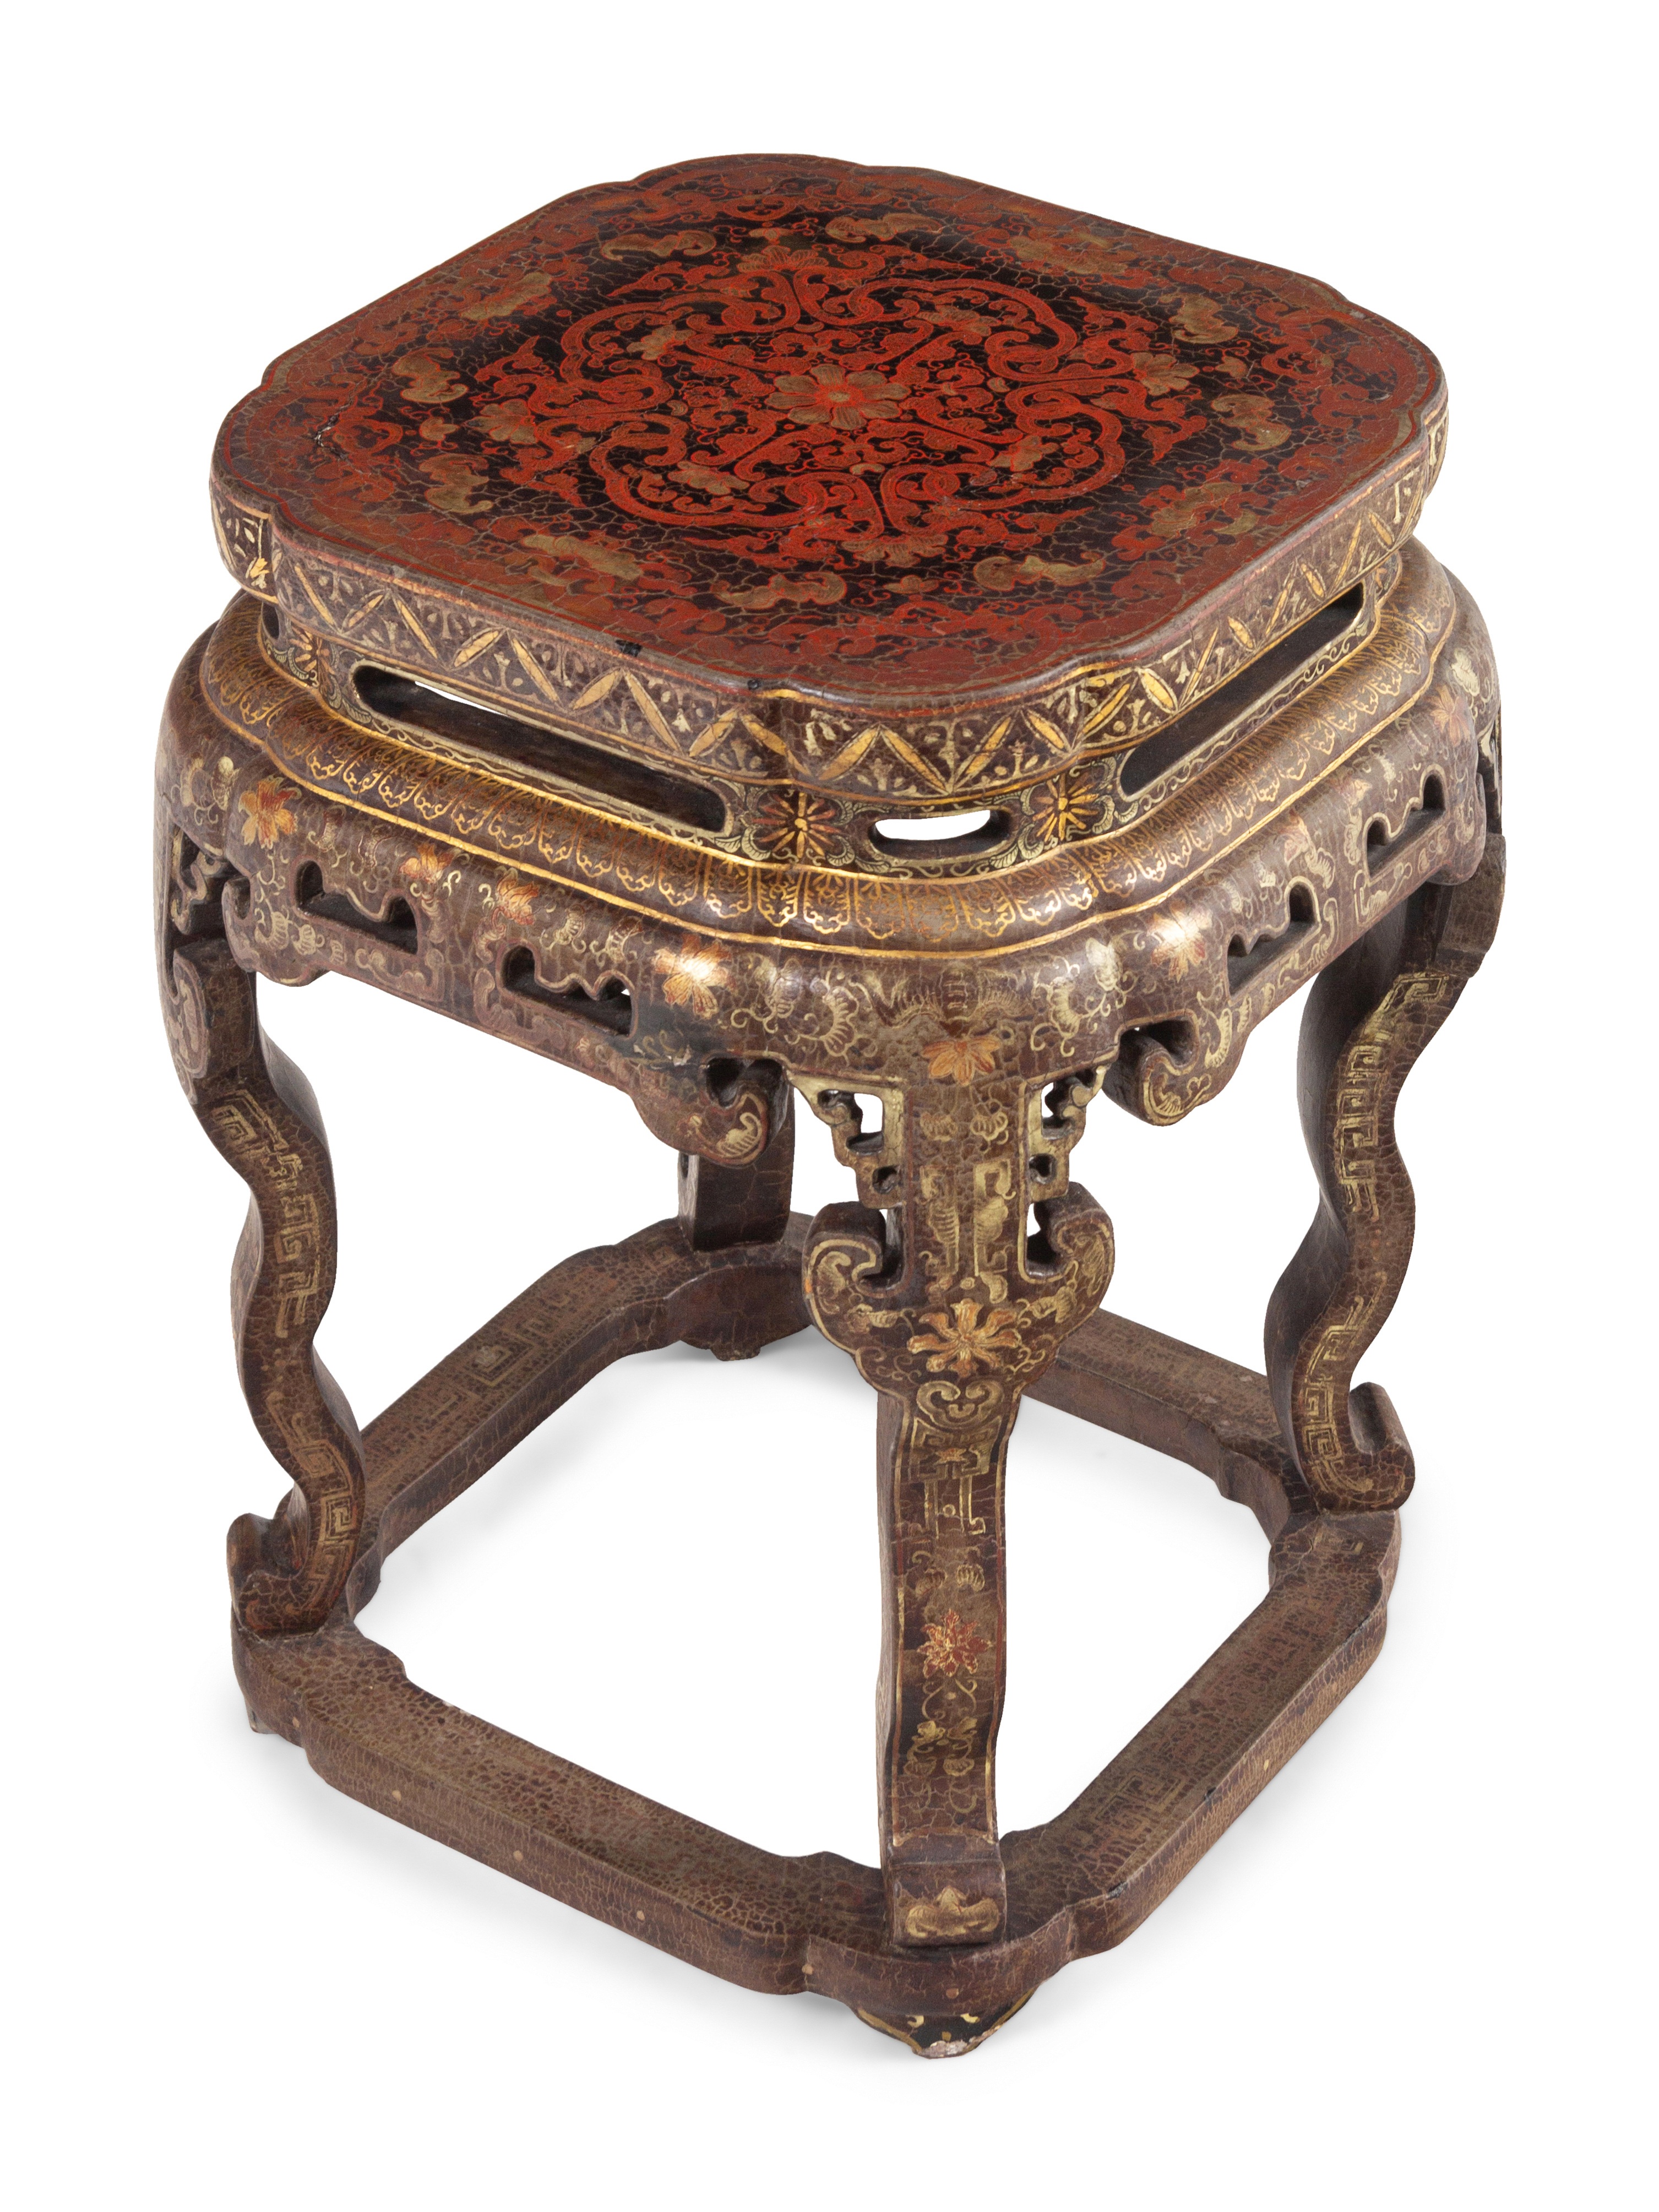 A Pair of Chinese Export Black Lacquer and Parcel-Gilt Low Tables - Image 3 of 4